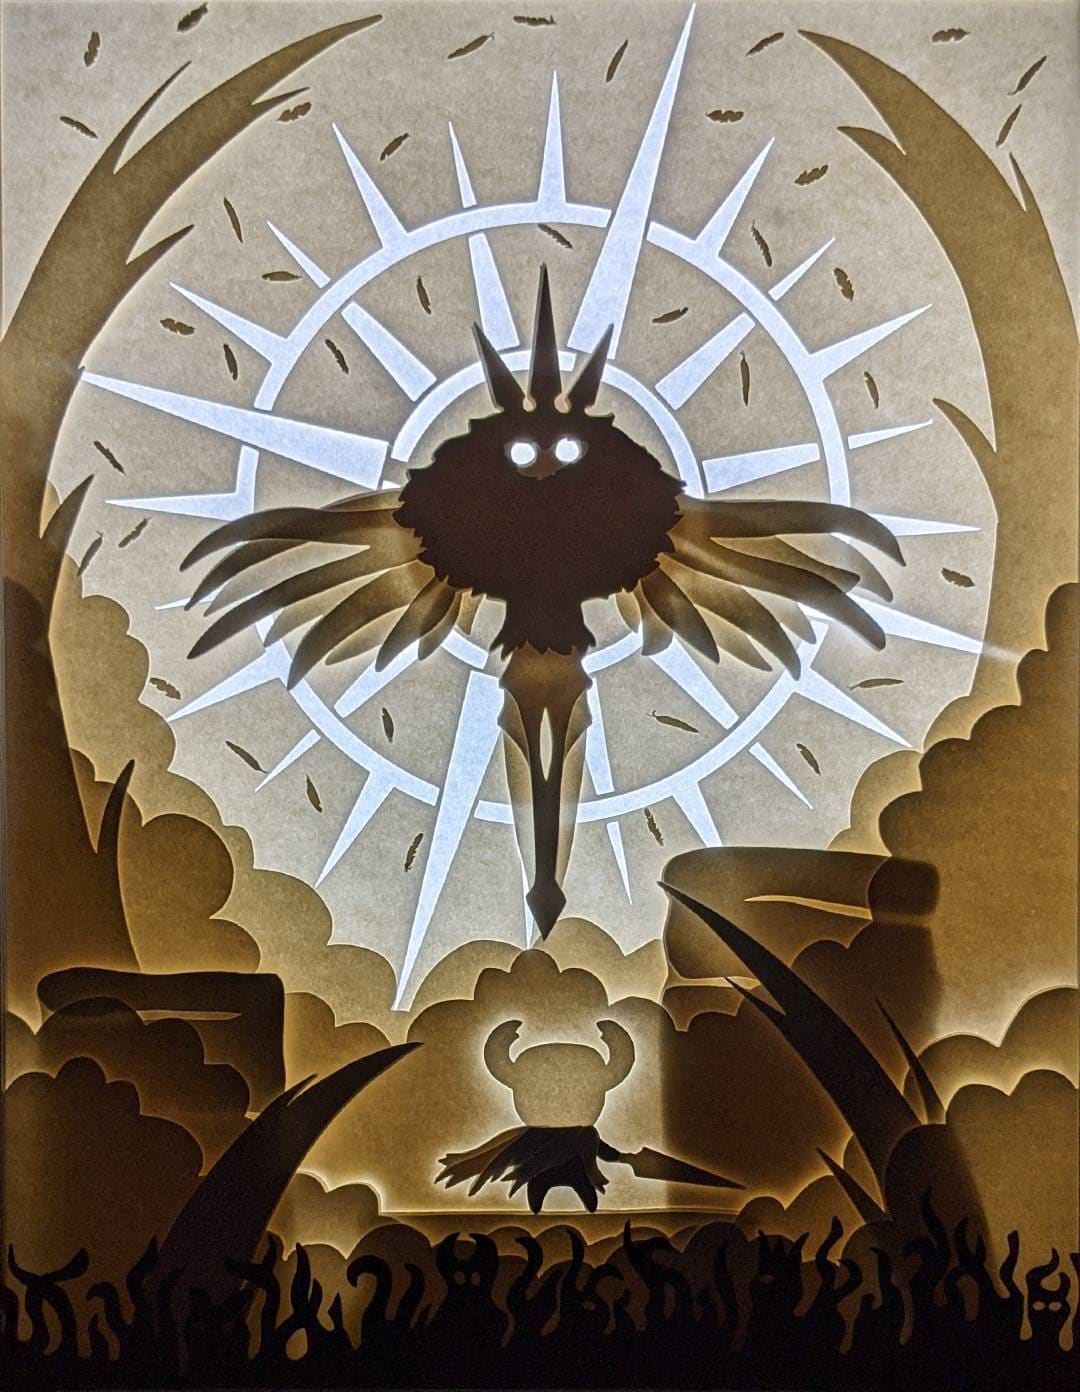 The Radiance Hollow Knight Videogame Themed Paper Cut Light